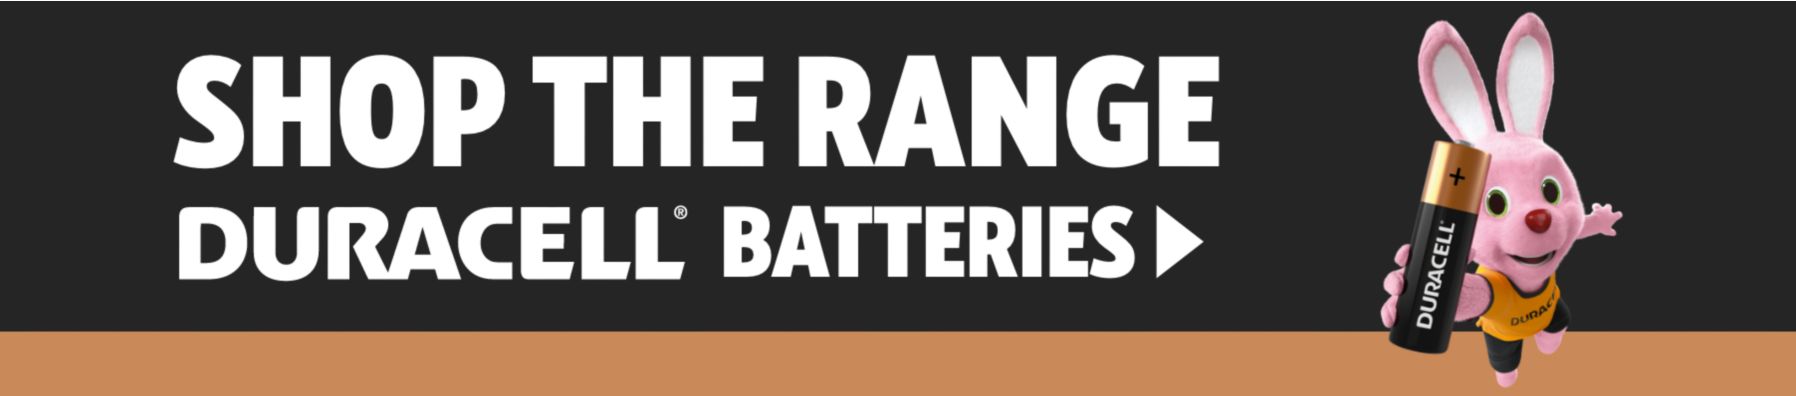 Shop the range of Duracell Batteries